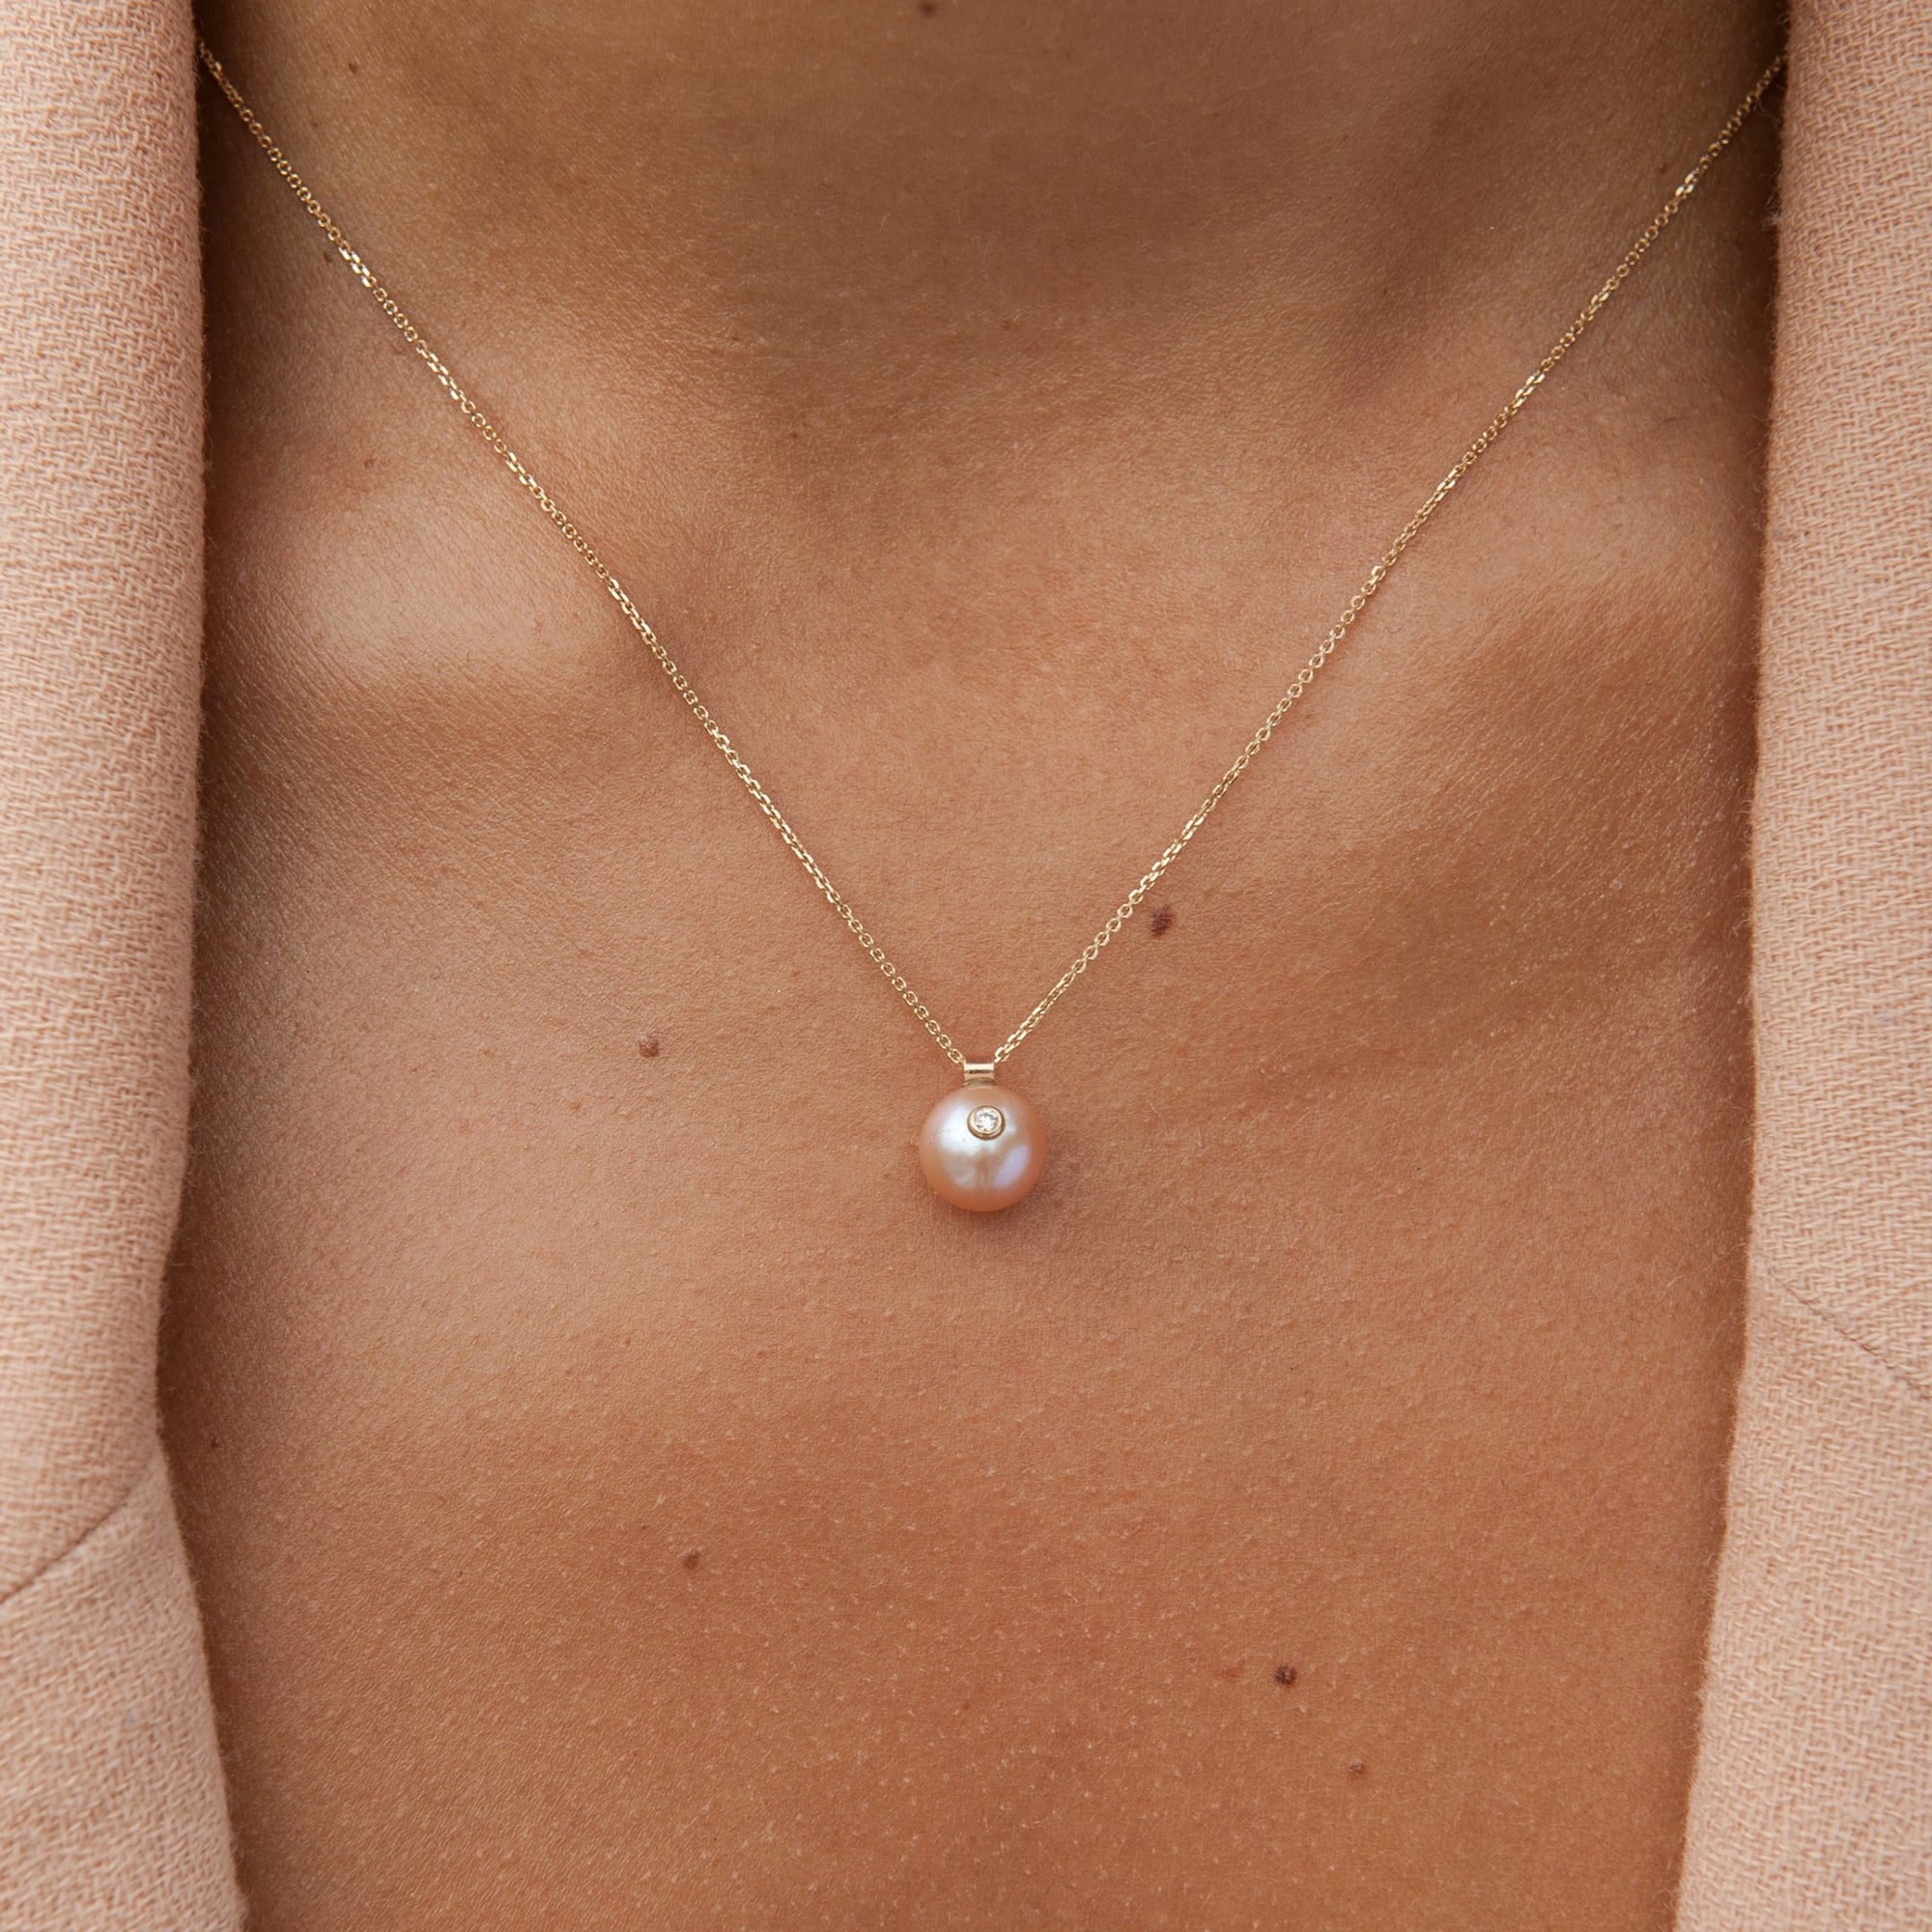 Everly Necklace, Pink Pearl